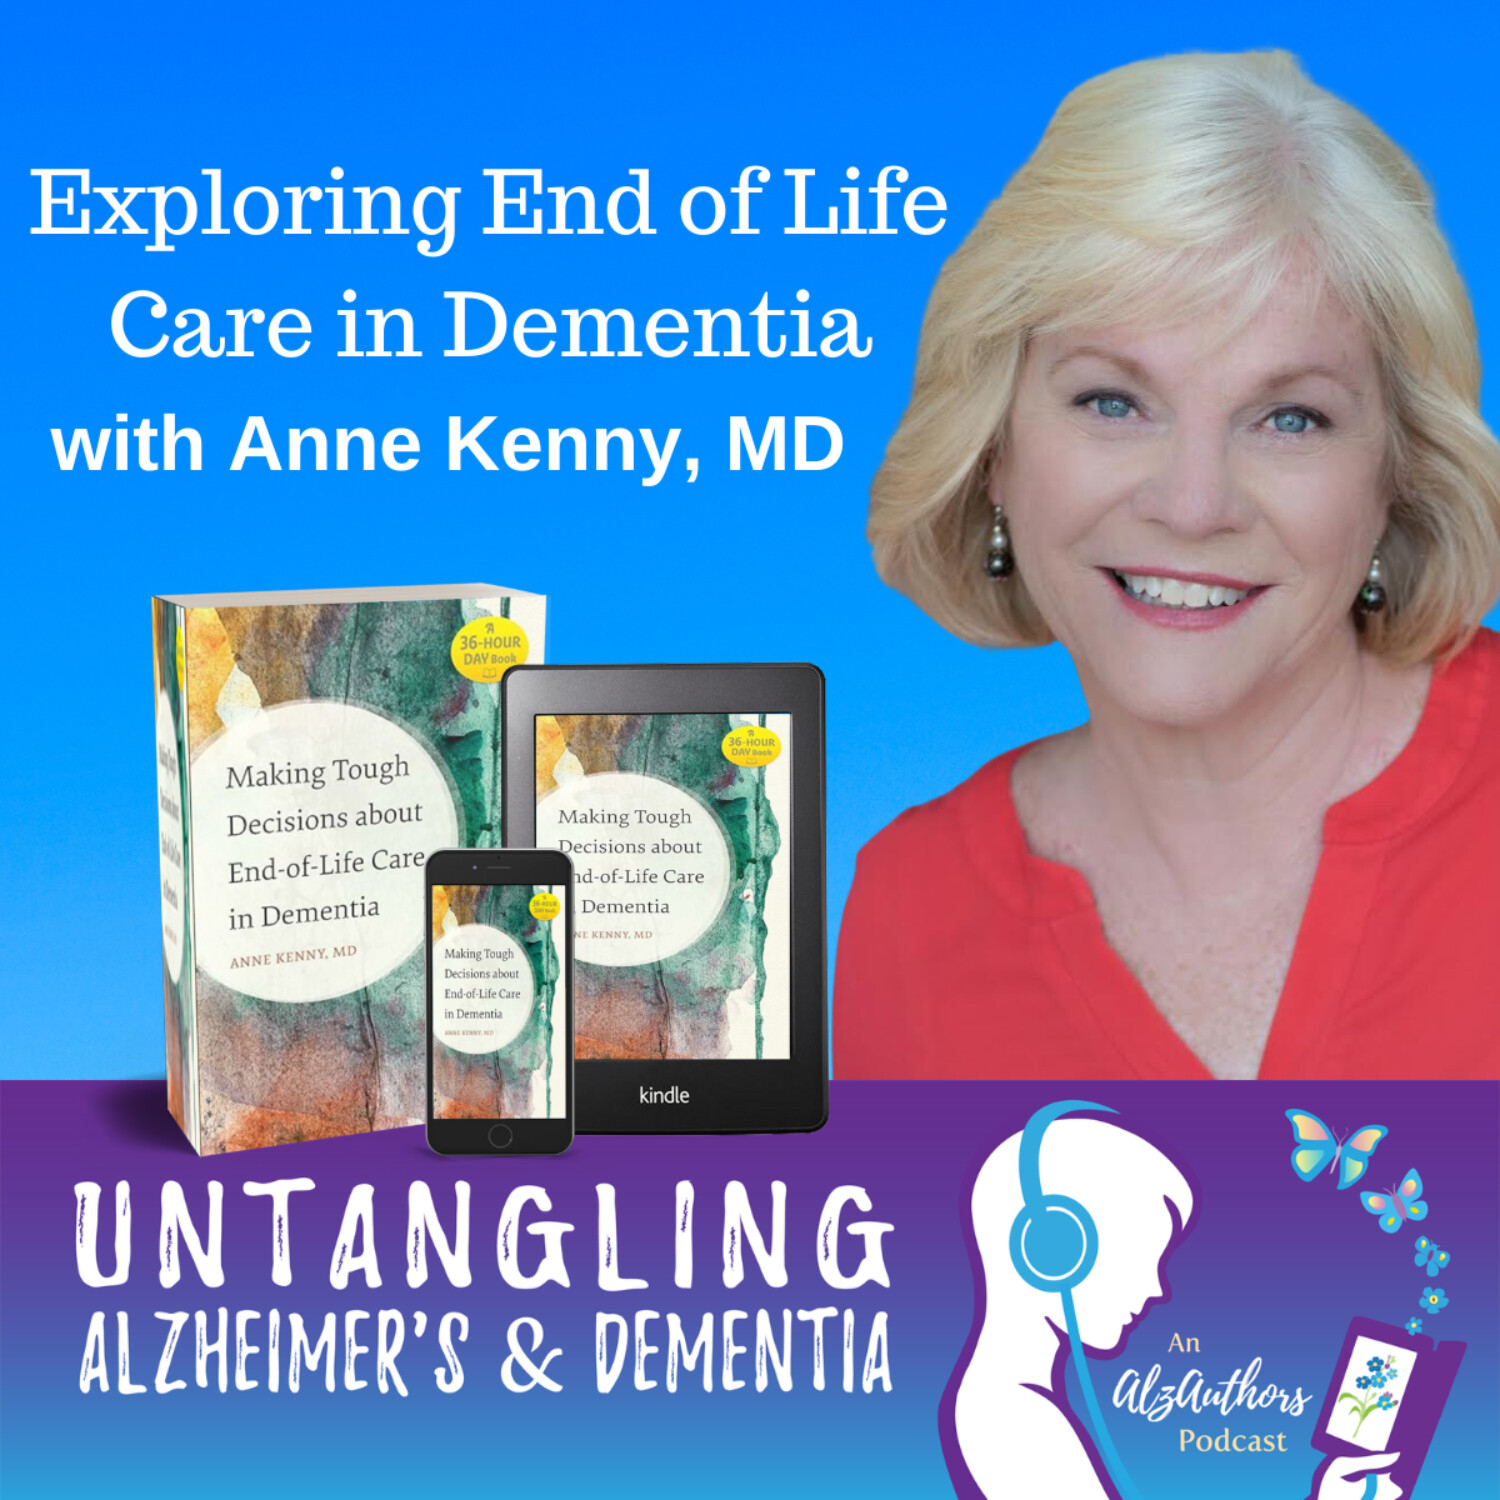 Exploring End of Life Care in Dementia with Anne Kenny, MD